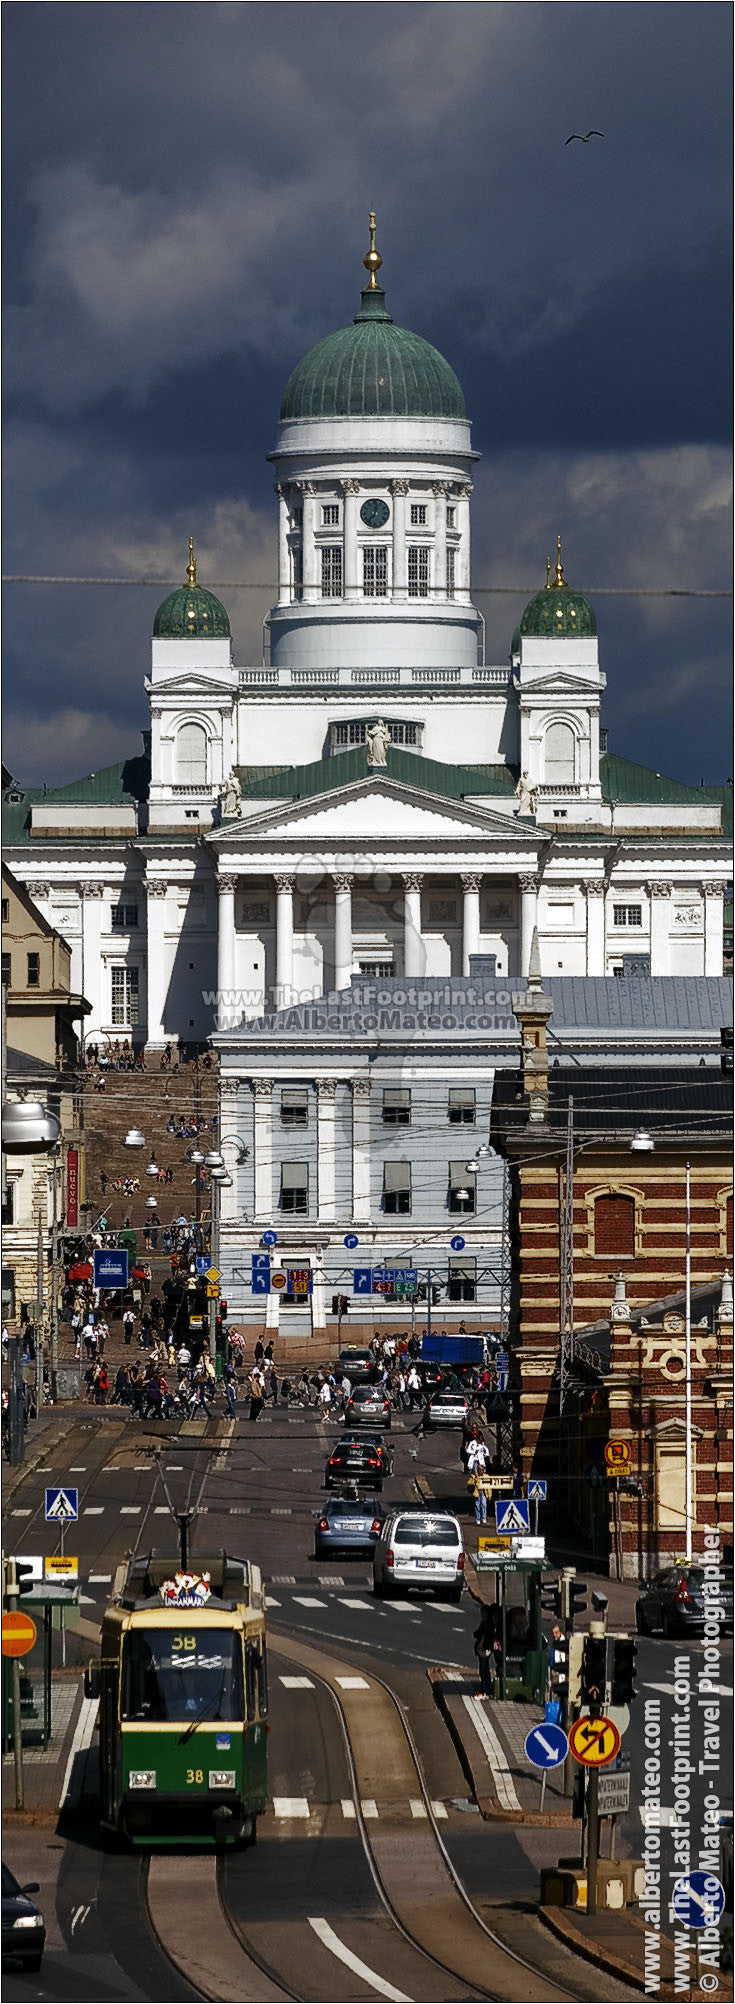 The Cathedral of Helsinki, Finland. | Vertical Crop for Pinterest.